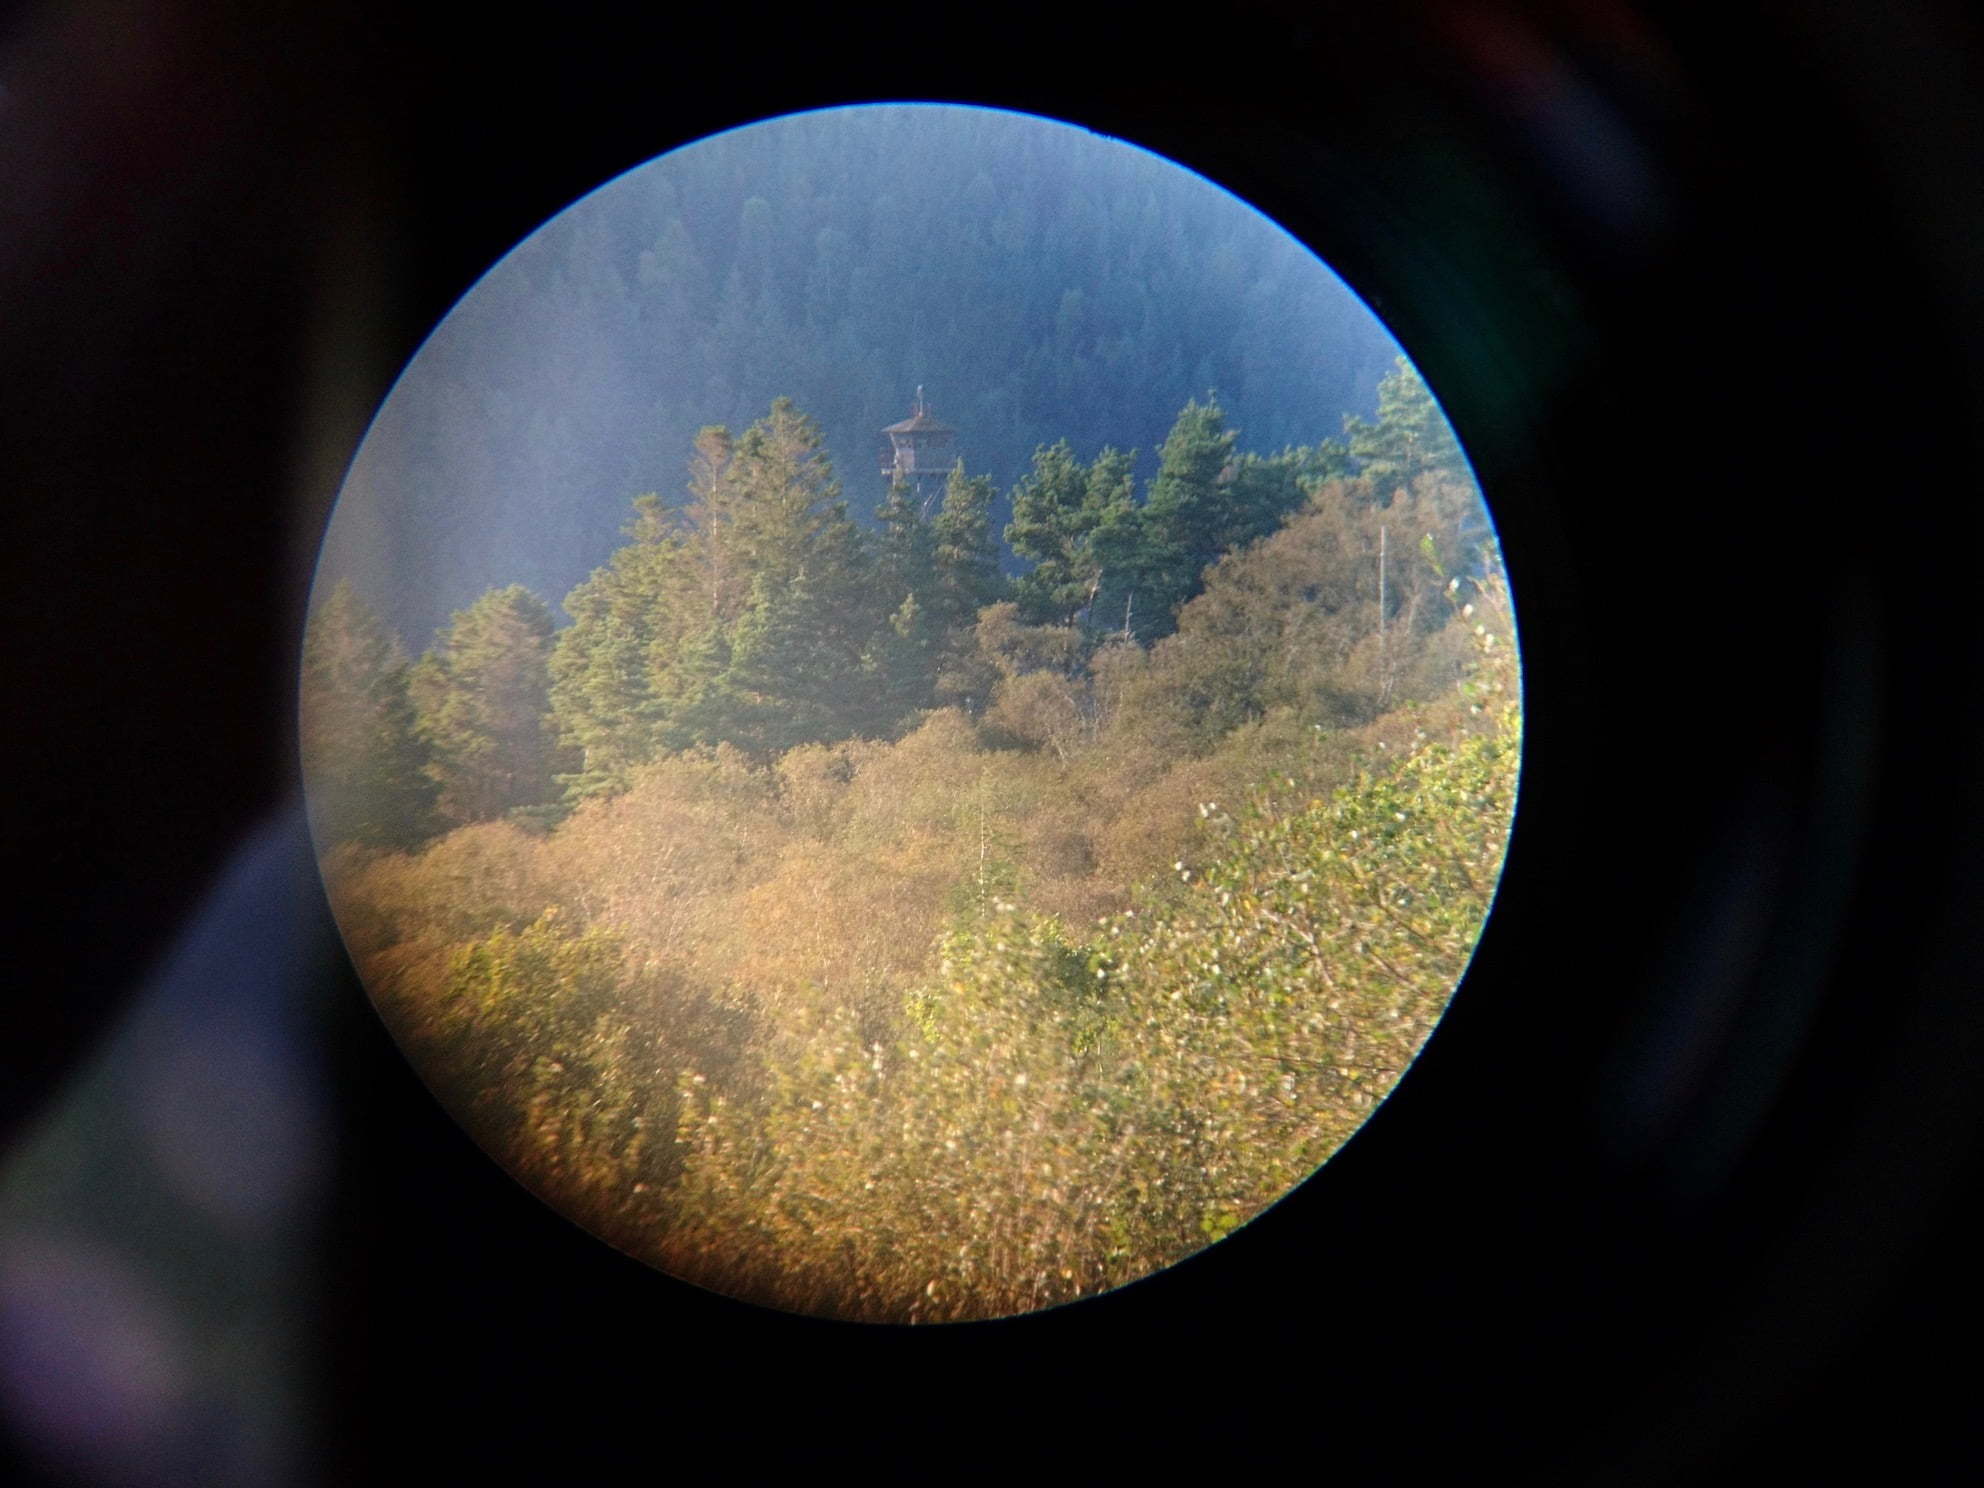 Image of Watching the Watcher 2019 by B.D. Owens. Image shows a black background with circular image within. In the circle there are various evergreen trees and a surveillance tower partially hidden by trees.